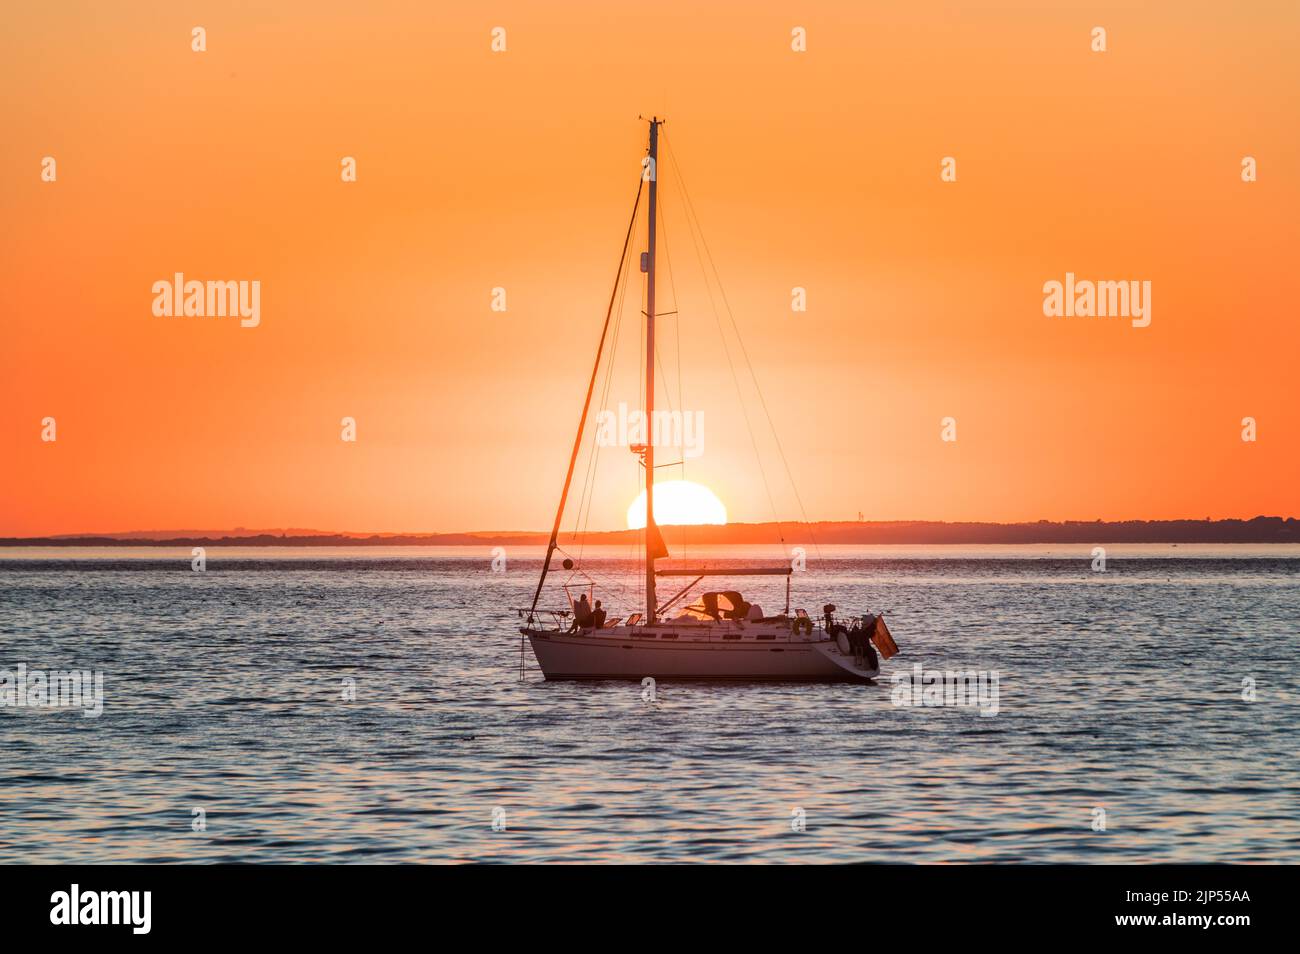 Sunsetting behind a yatch at Totland Bay, Isle of Wight Stock Photo